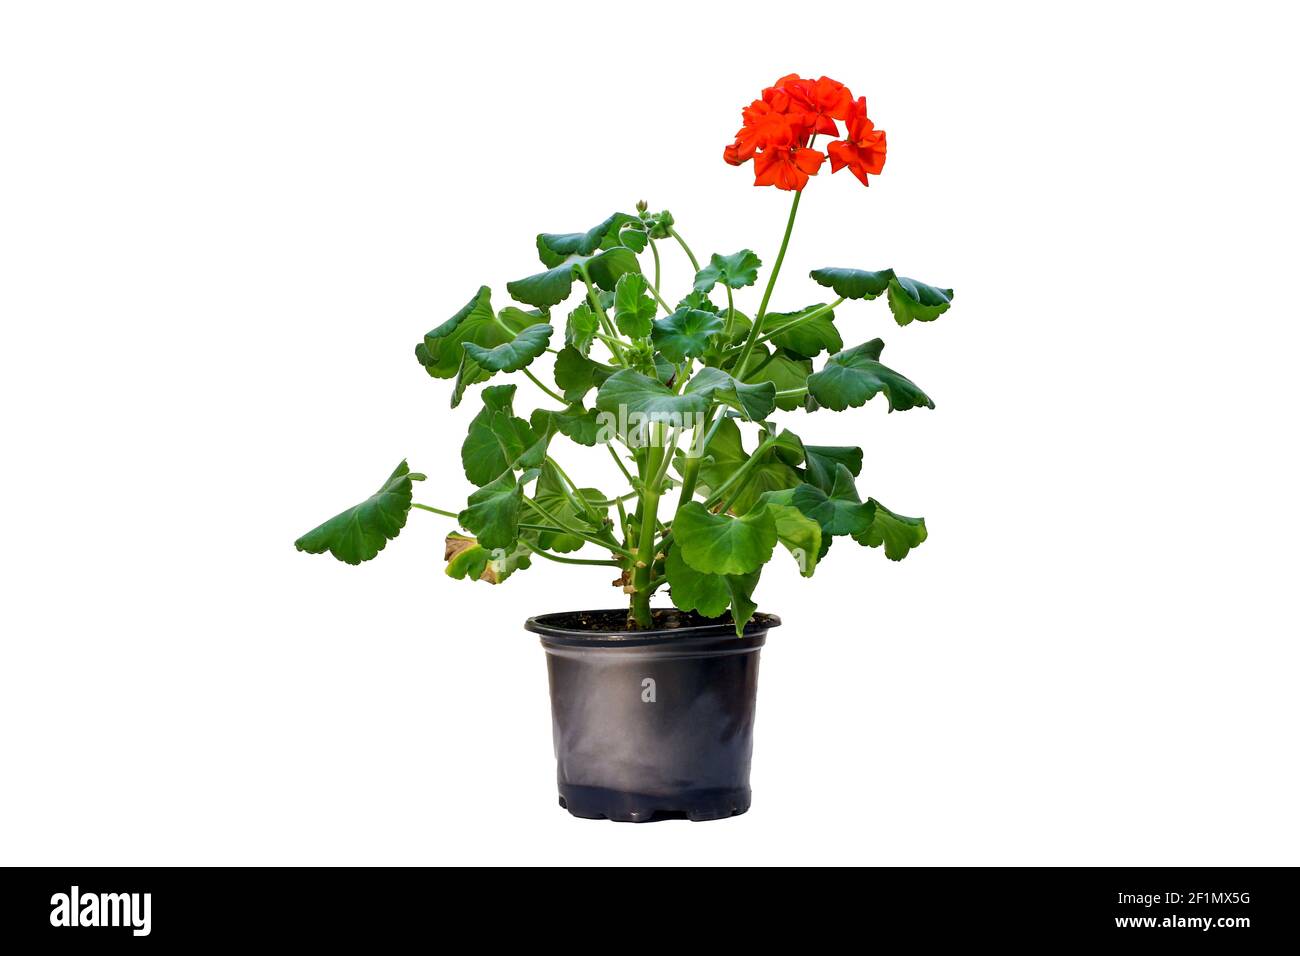 Image of a blooming geranium houseplant in red on a white background Stock Photo